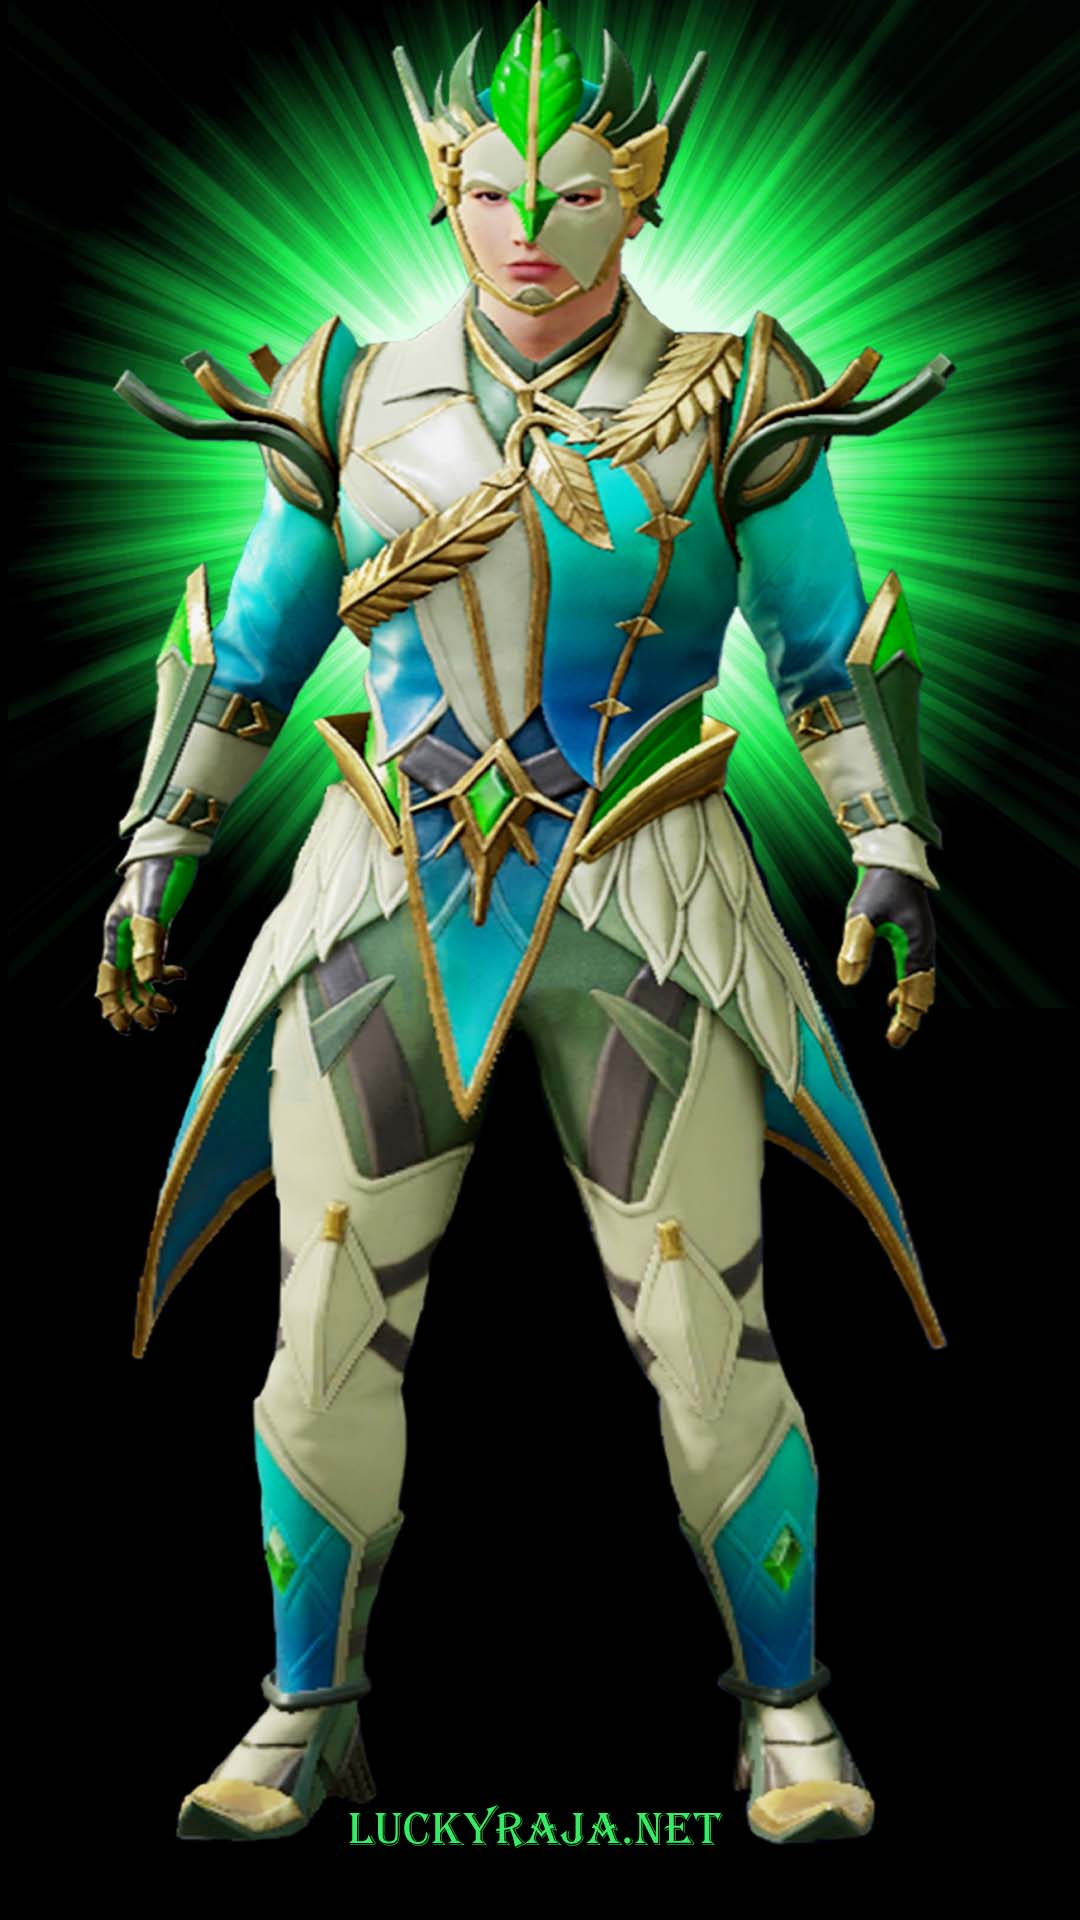 Heart Of Jade,Heart Of Jade images,Heart Of Jade outfits